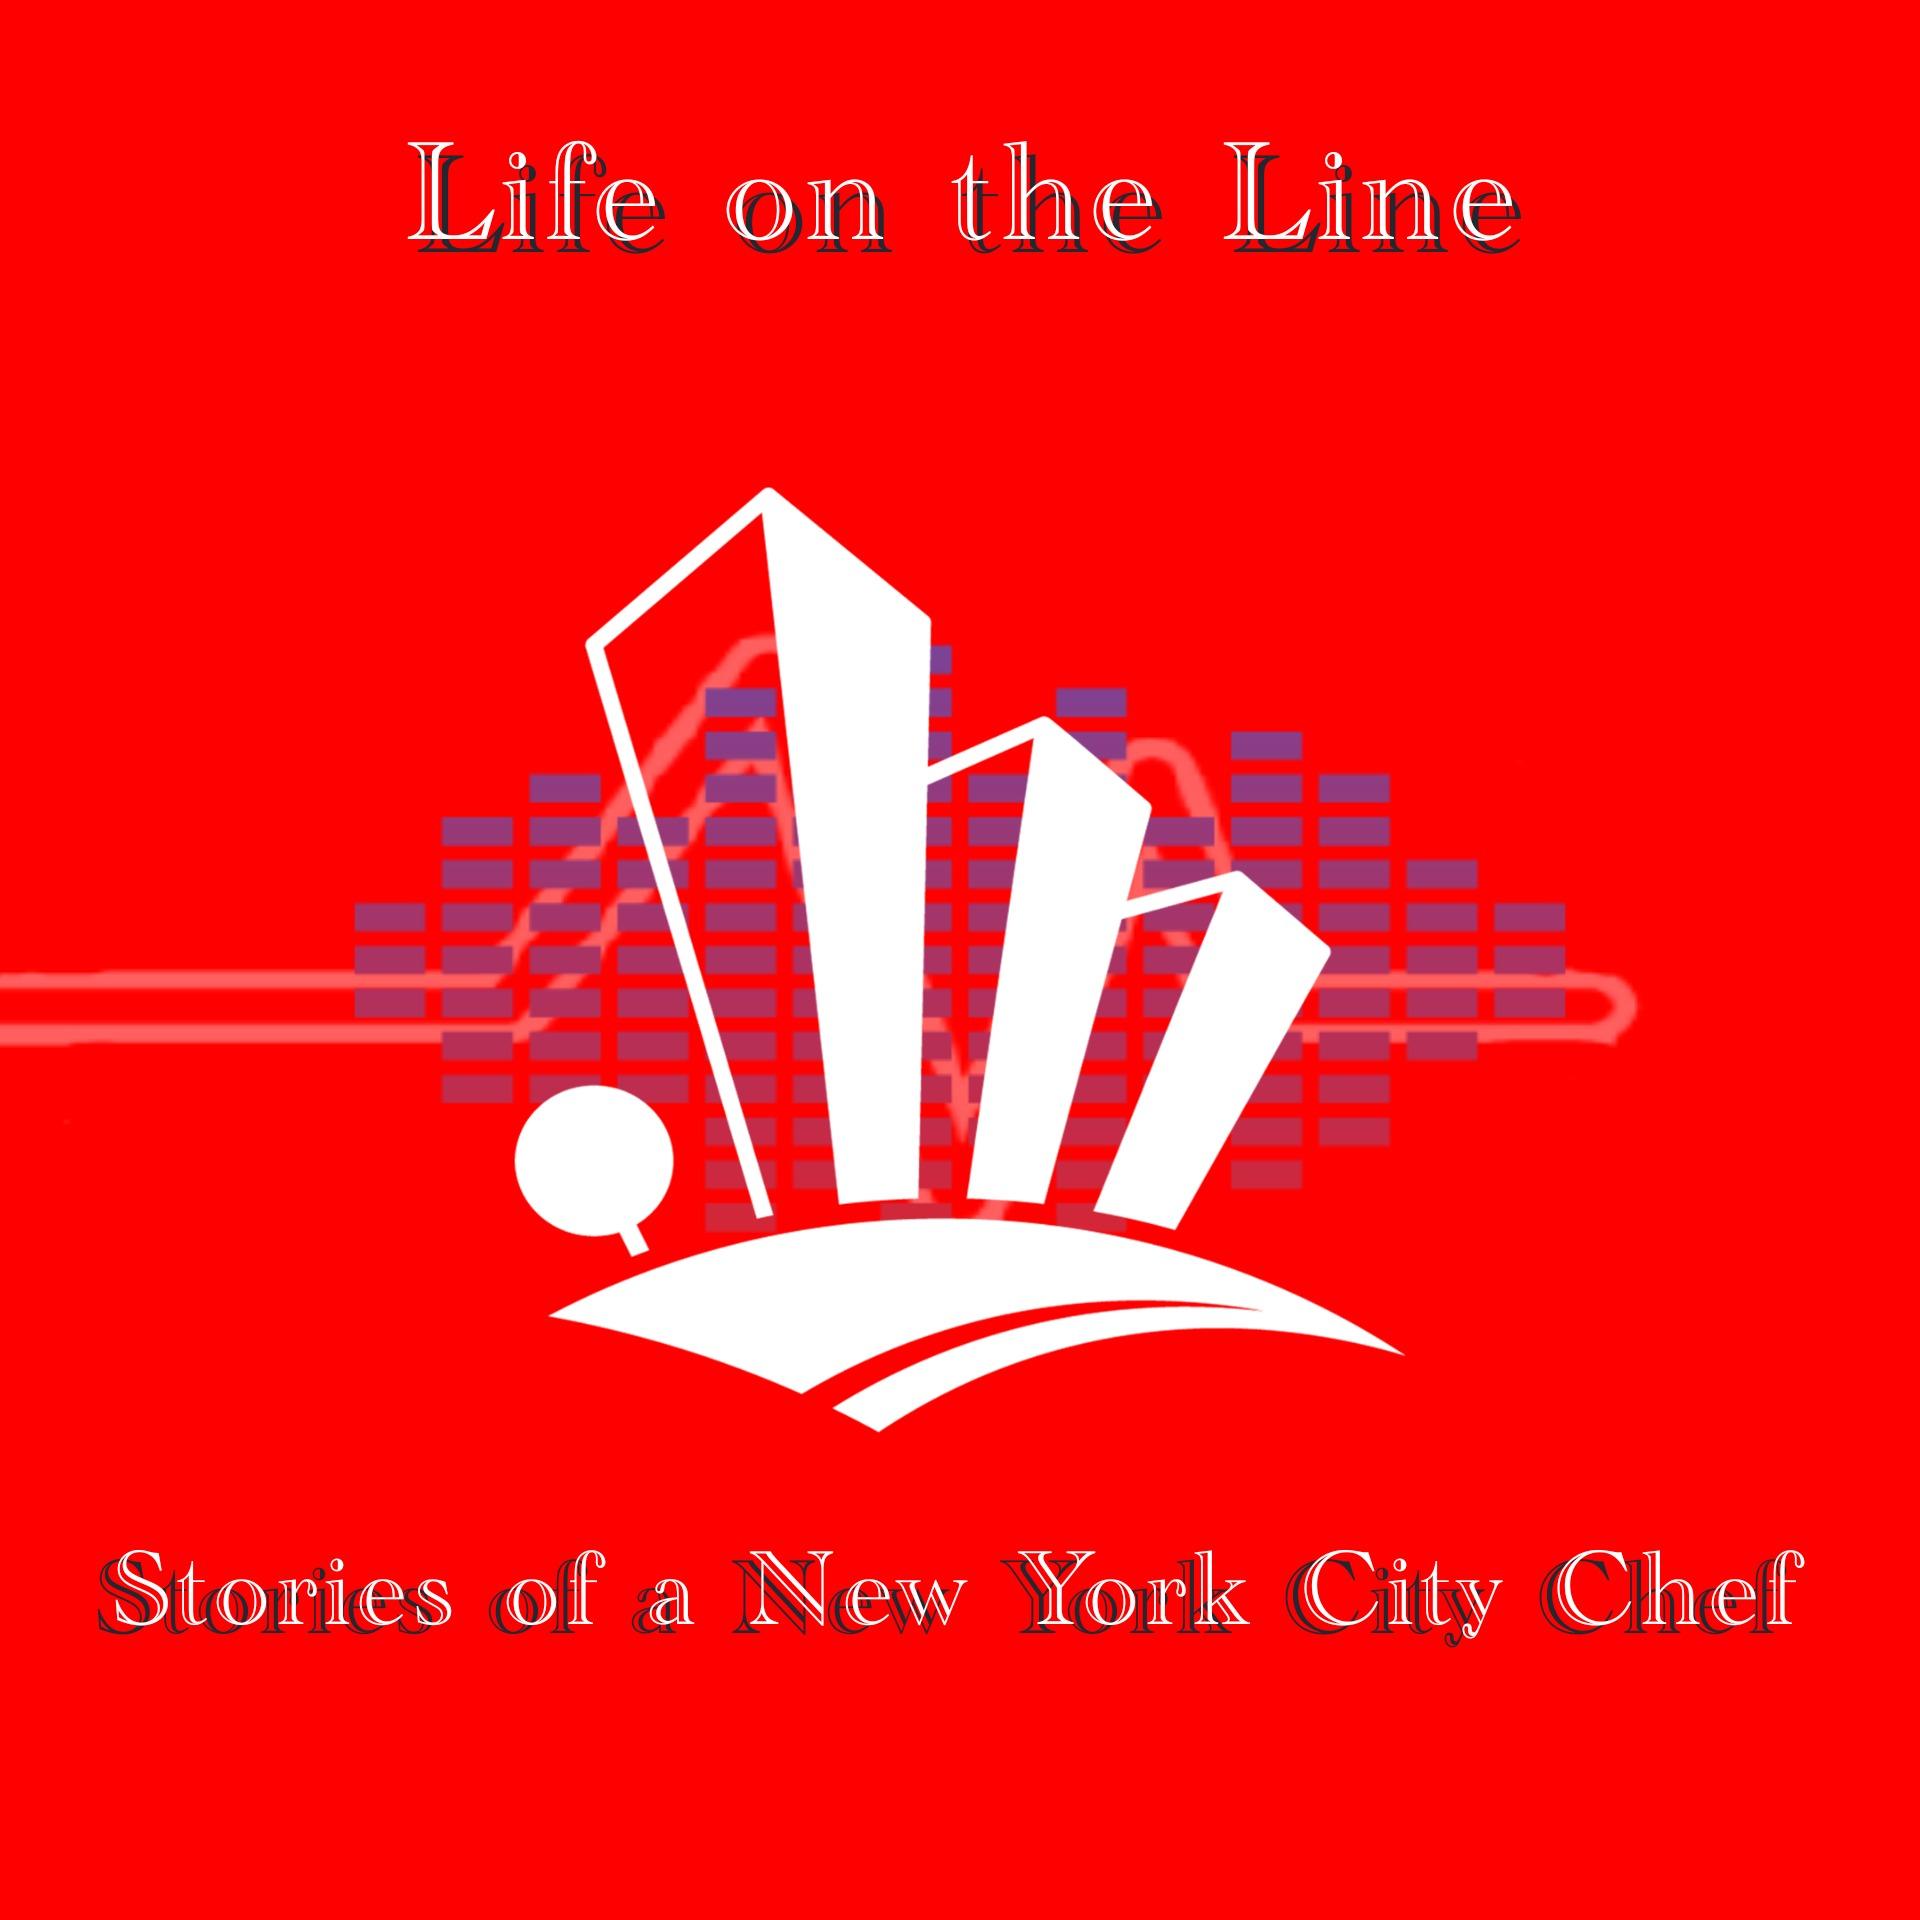 Life on the Line: Stories of a New York City Chef